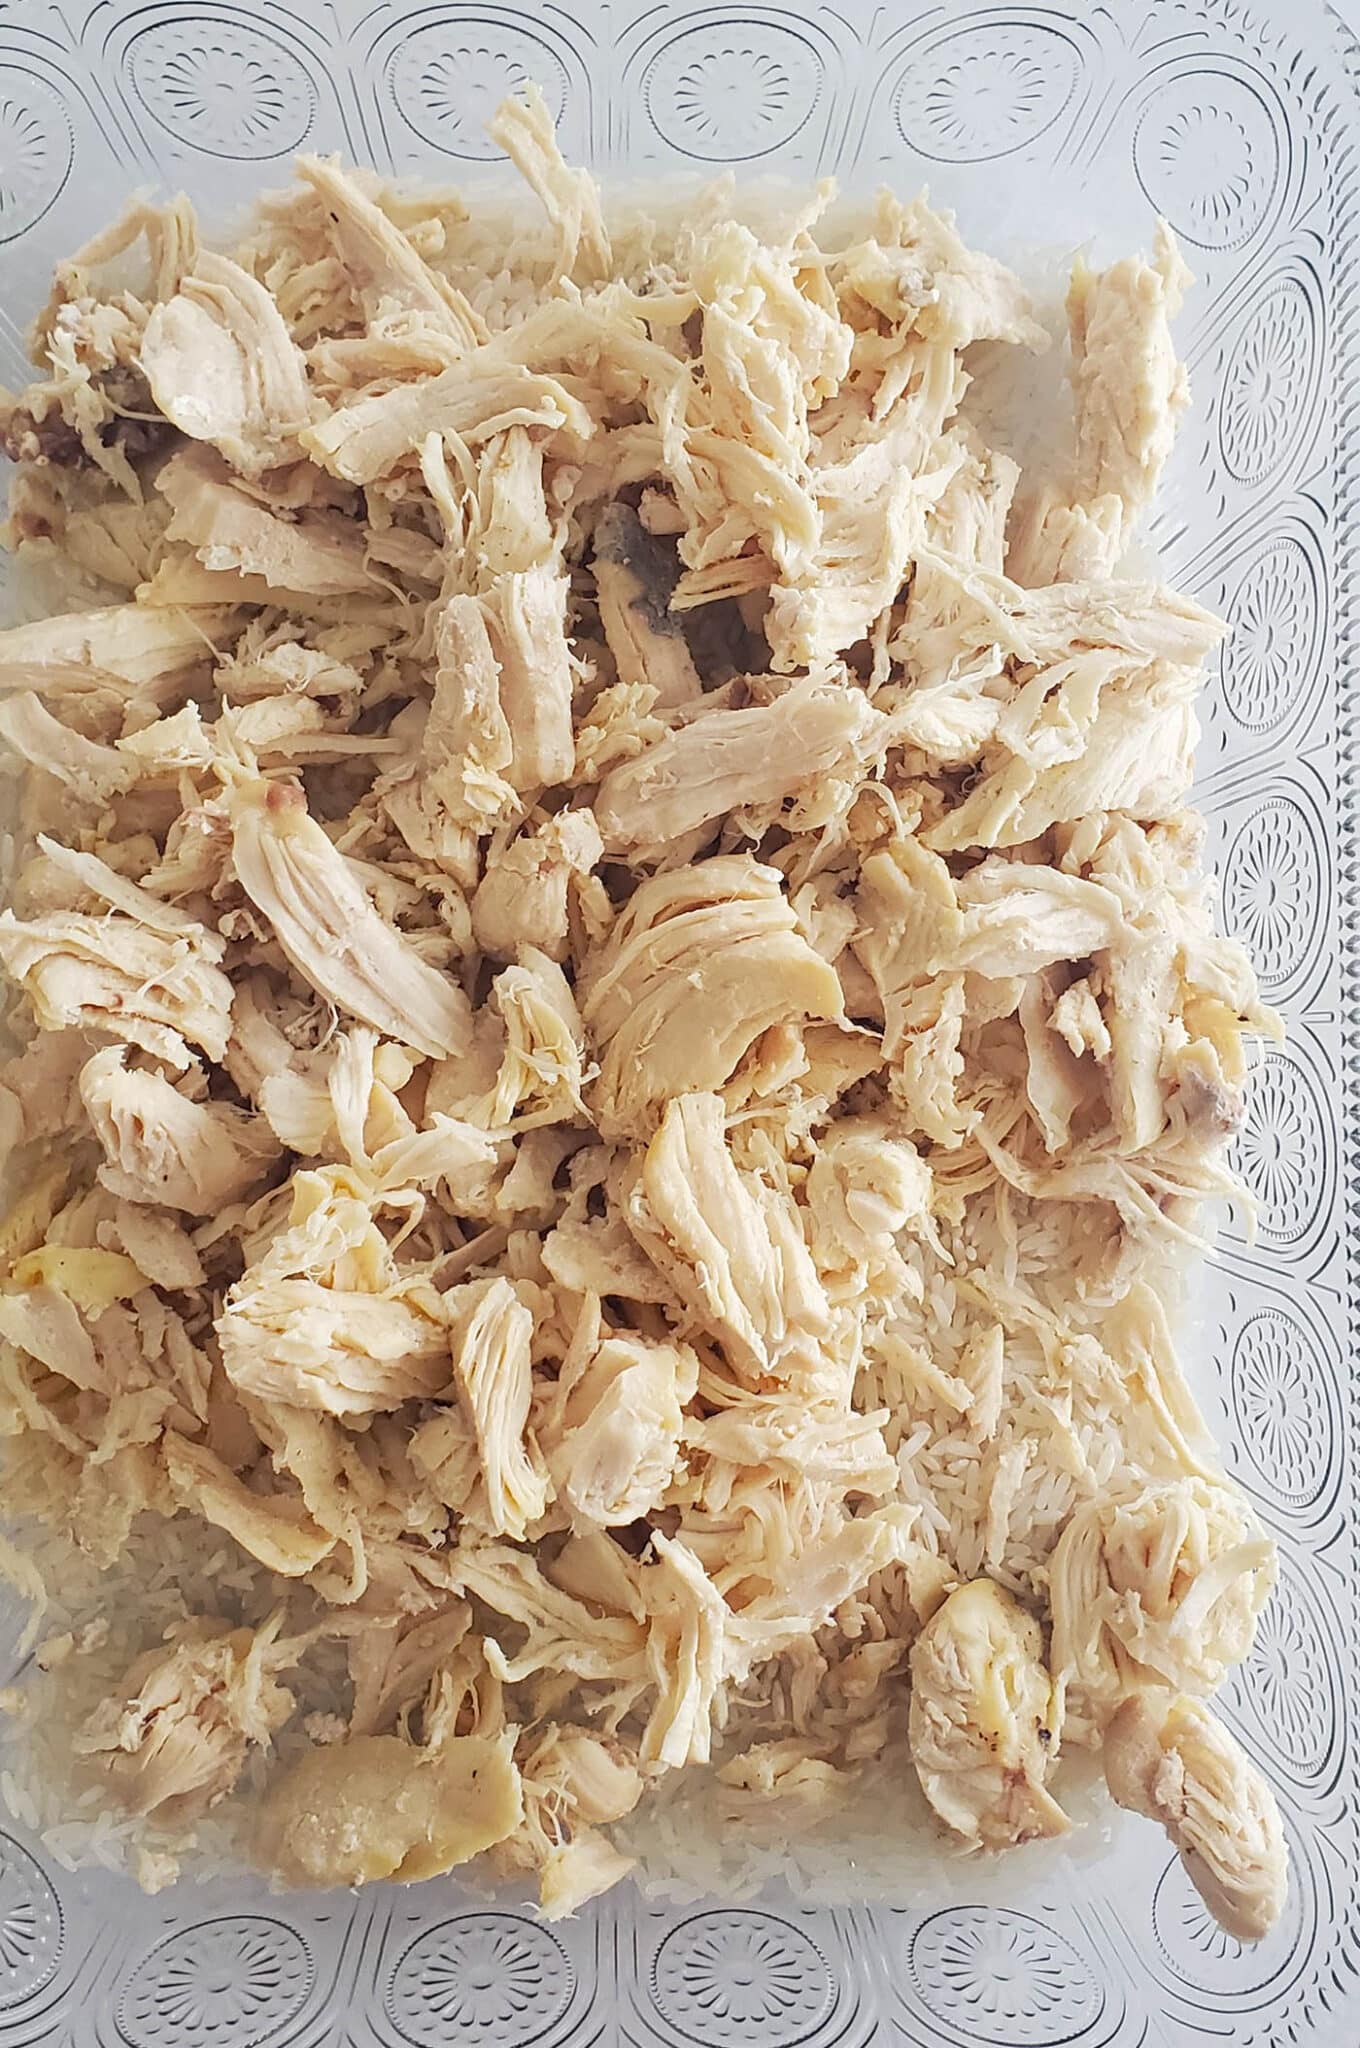 shredded chicken goes right on top of the rice in the pan for chicken hotdish